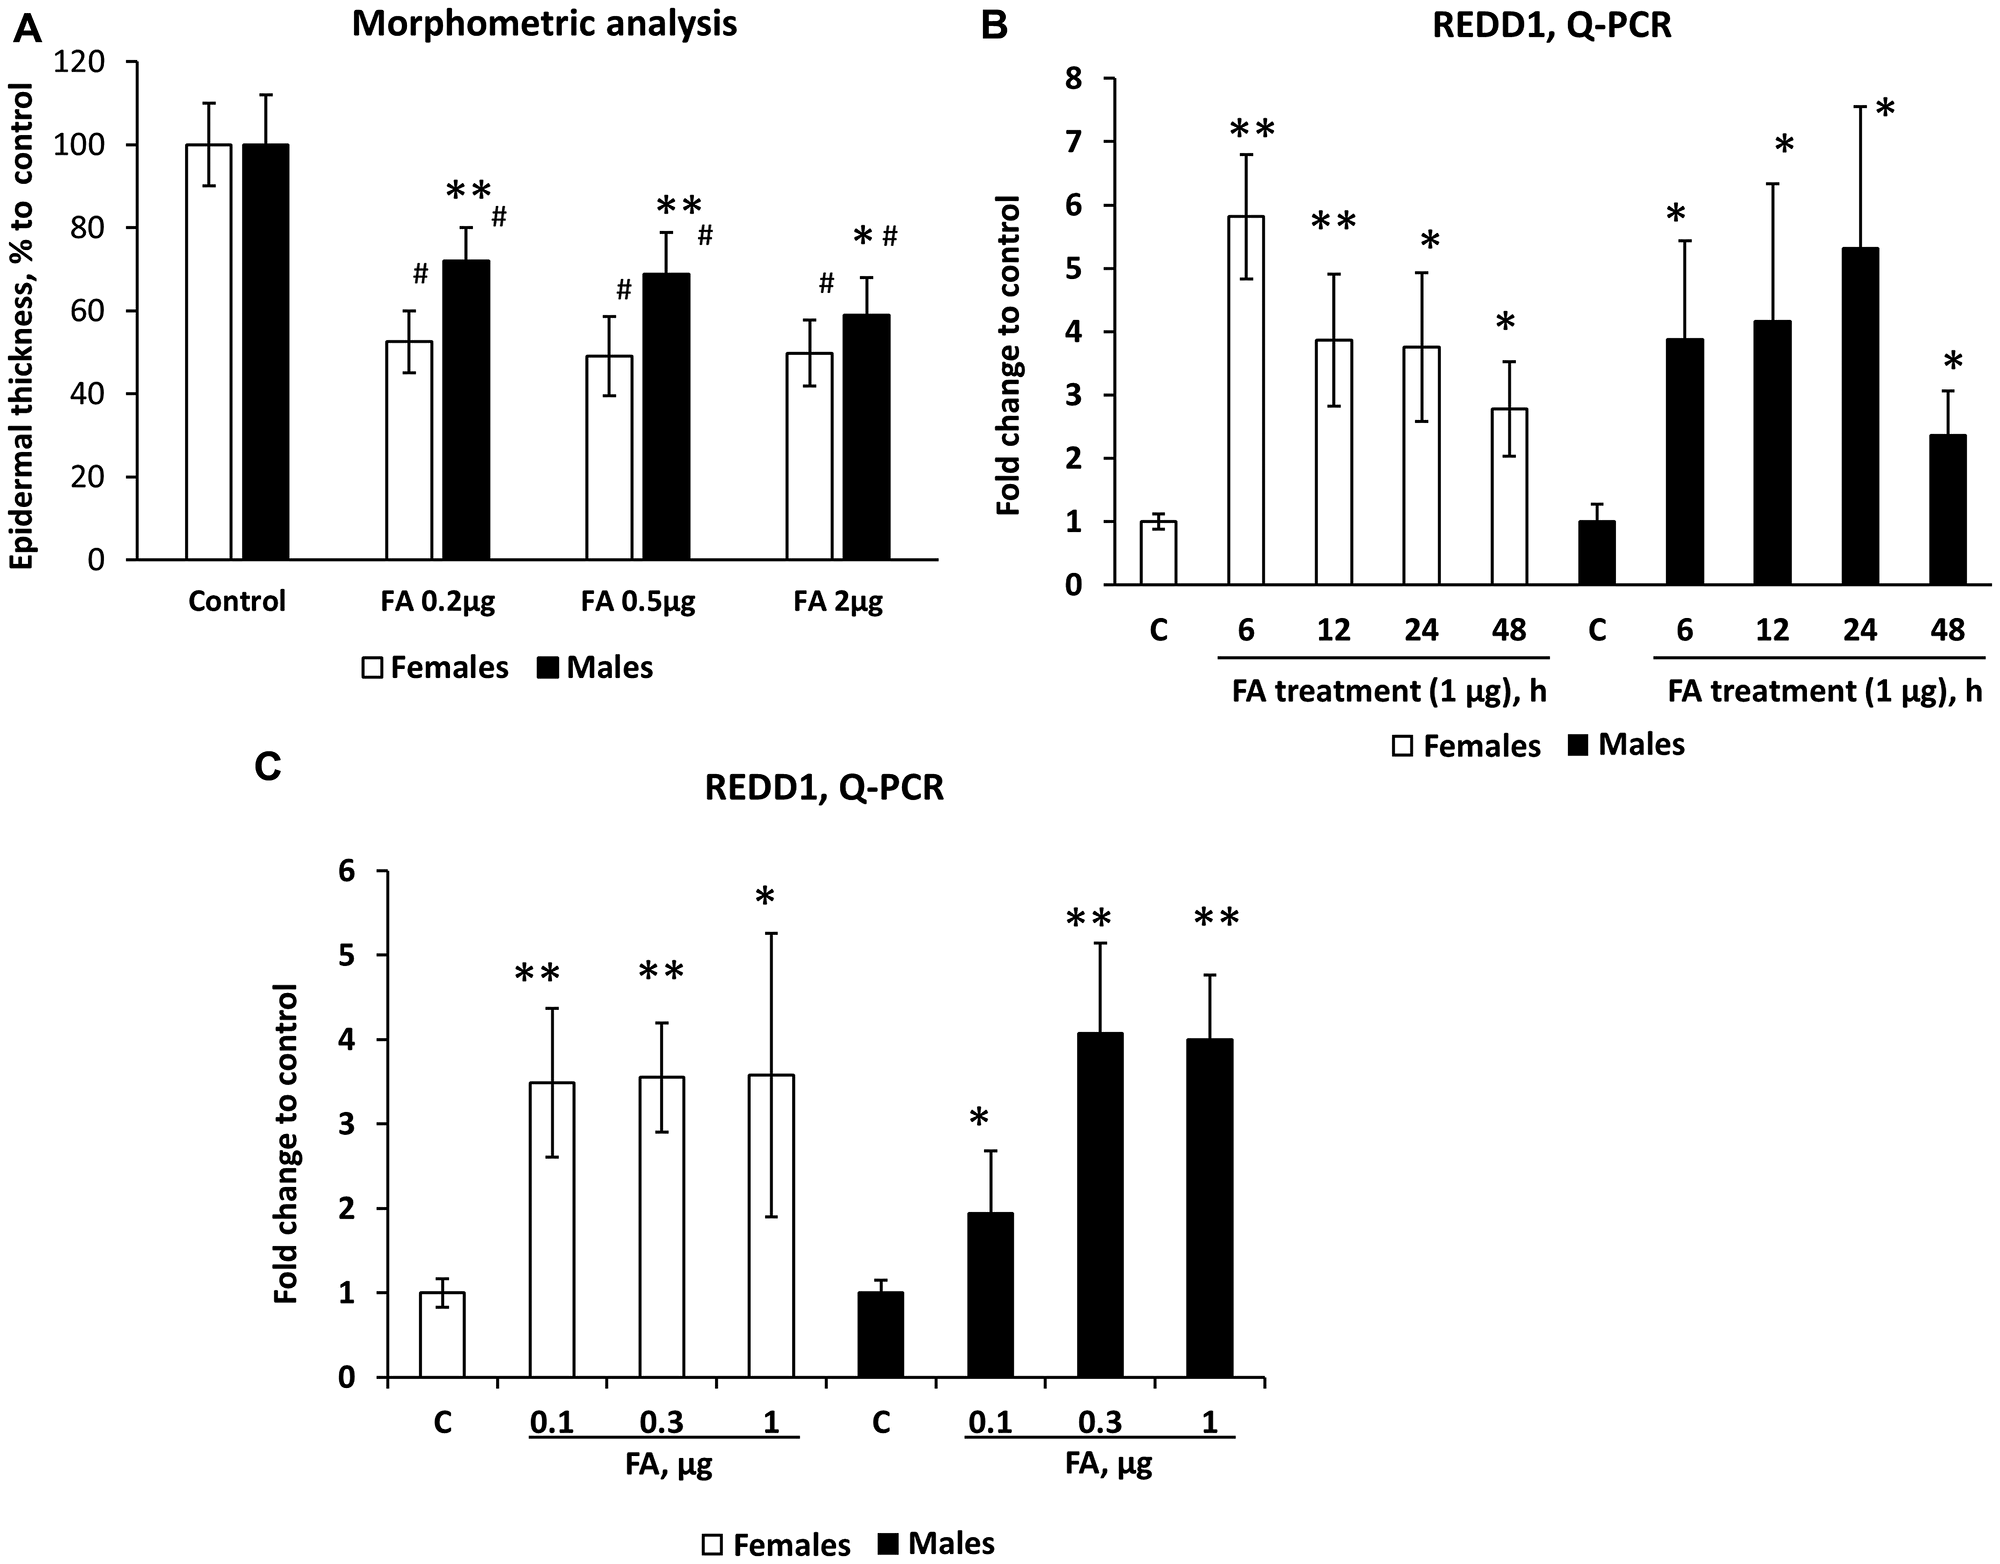 Females are more sensitive than males to REDD1 induction and glucocorticoid FA-induced skin atrophy.